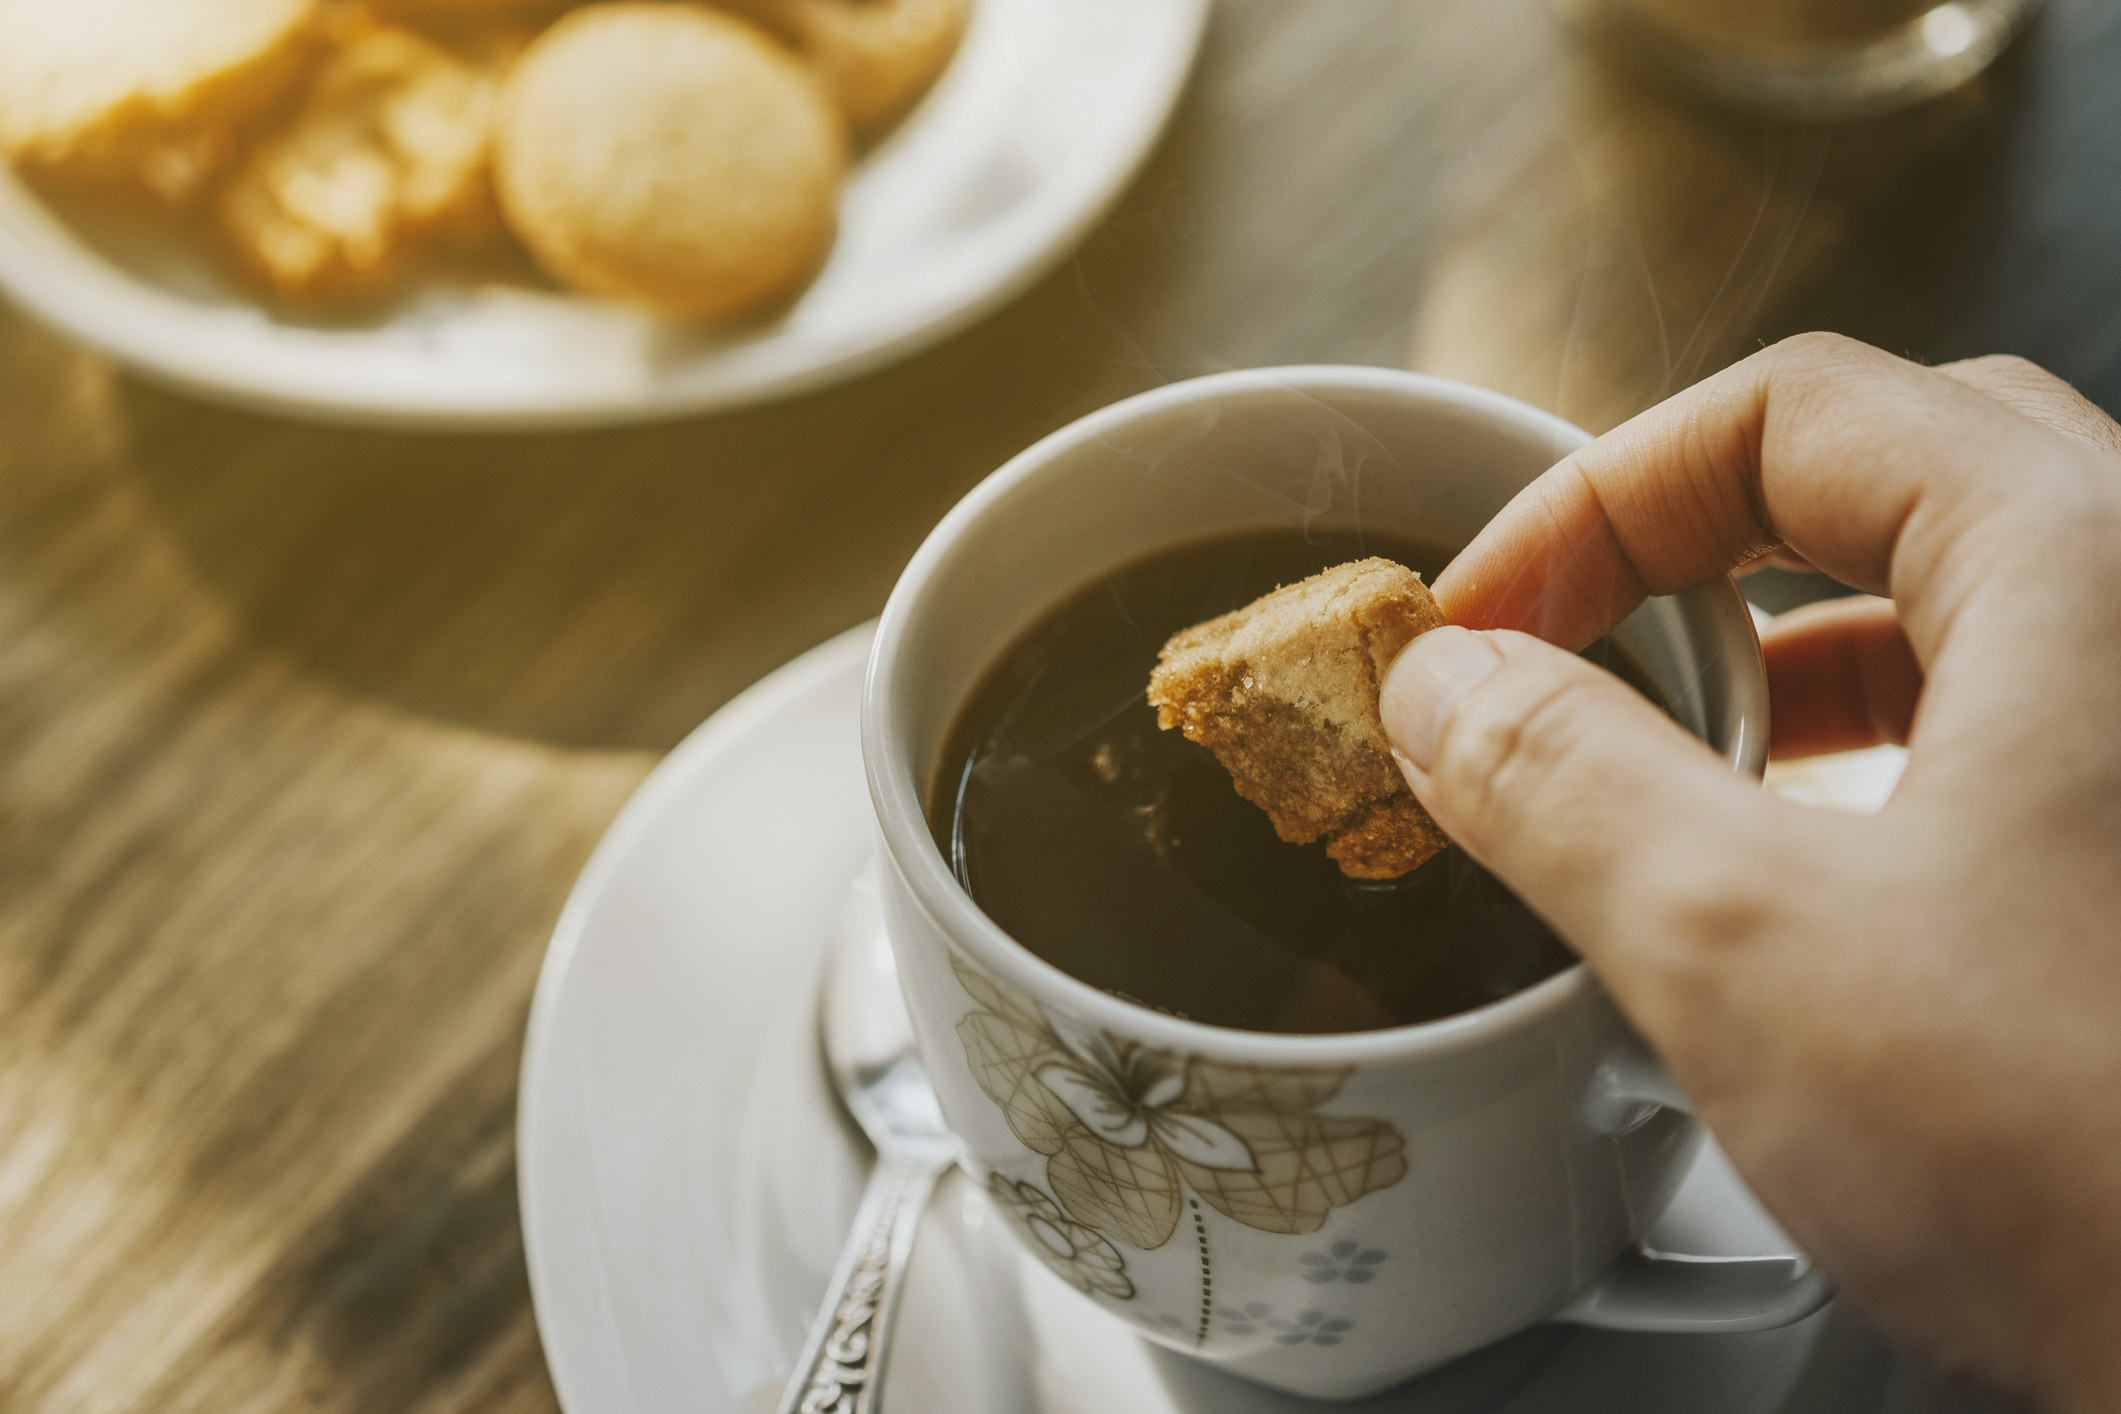 A hand dipping a cookie in coffee.